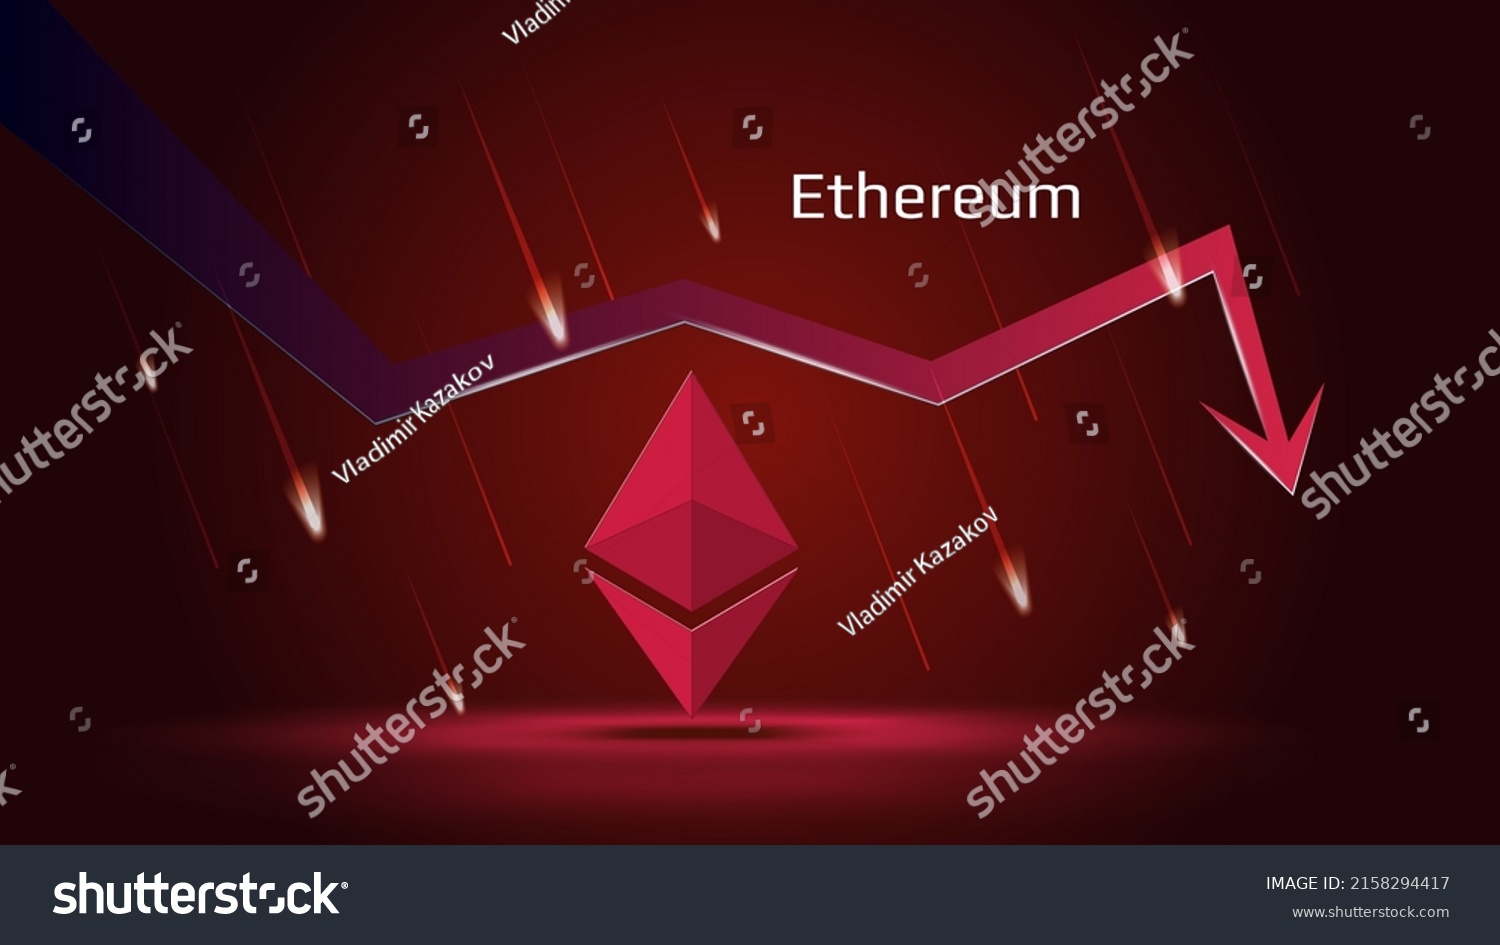 SVG of Ethereum ETH in downtrend and price falling down on dark red background. Cryptocurrency coin symbol and red down arrow with falling meteors. Trading crisis and crash. Vector illustration. svg